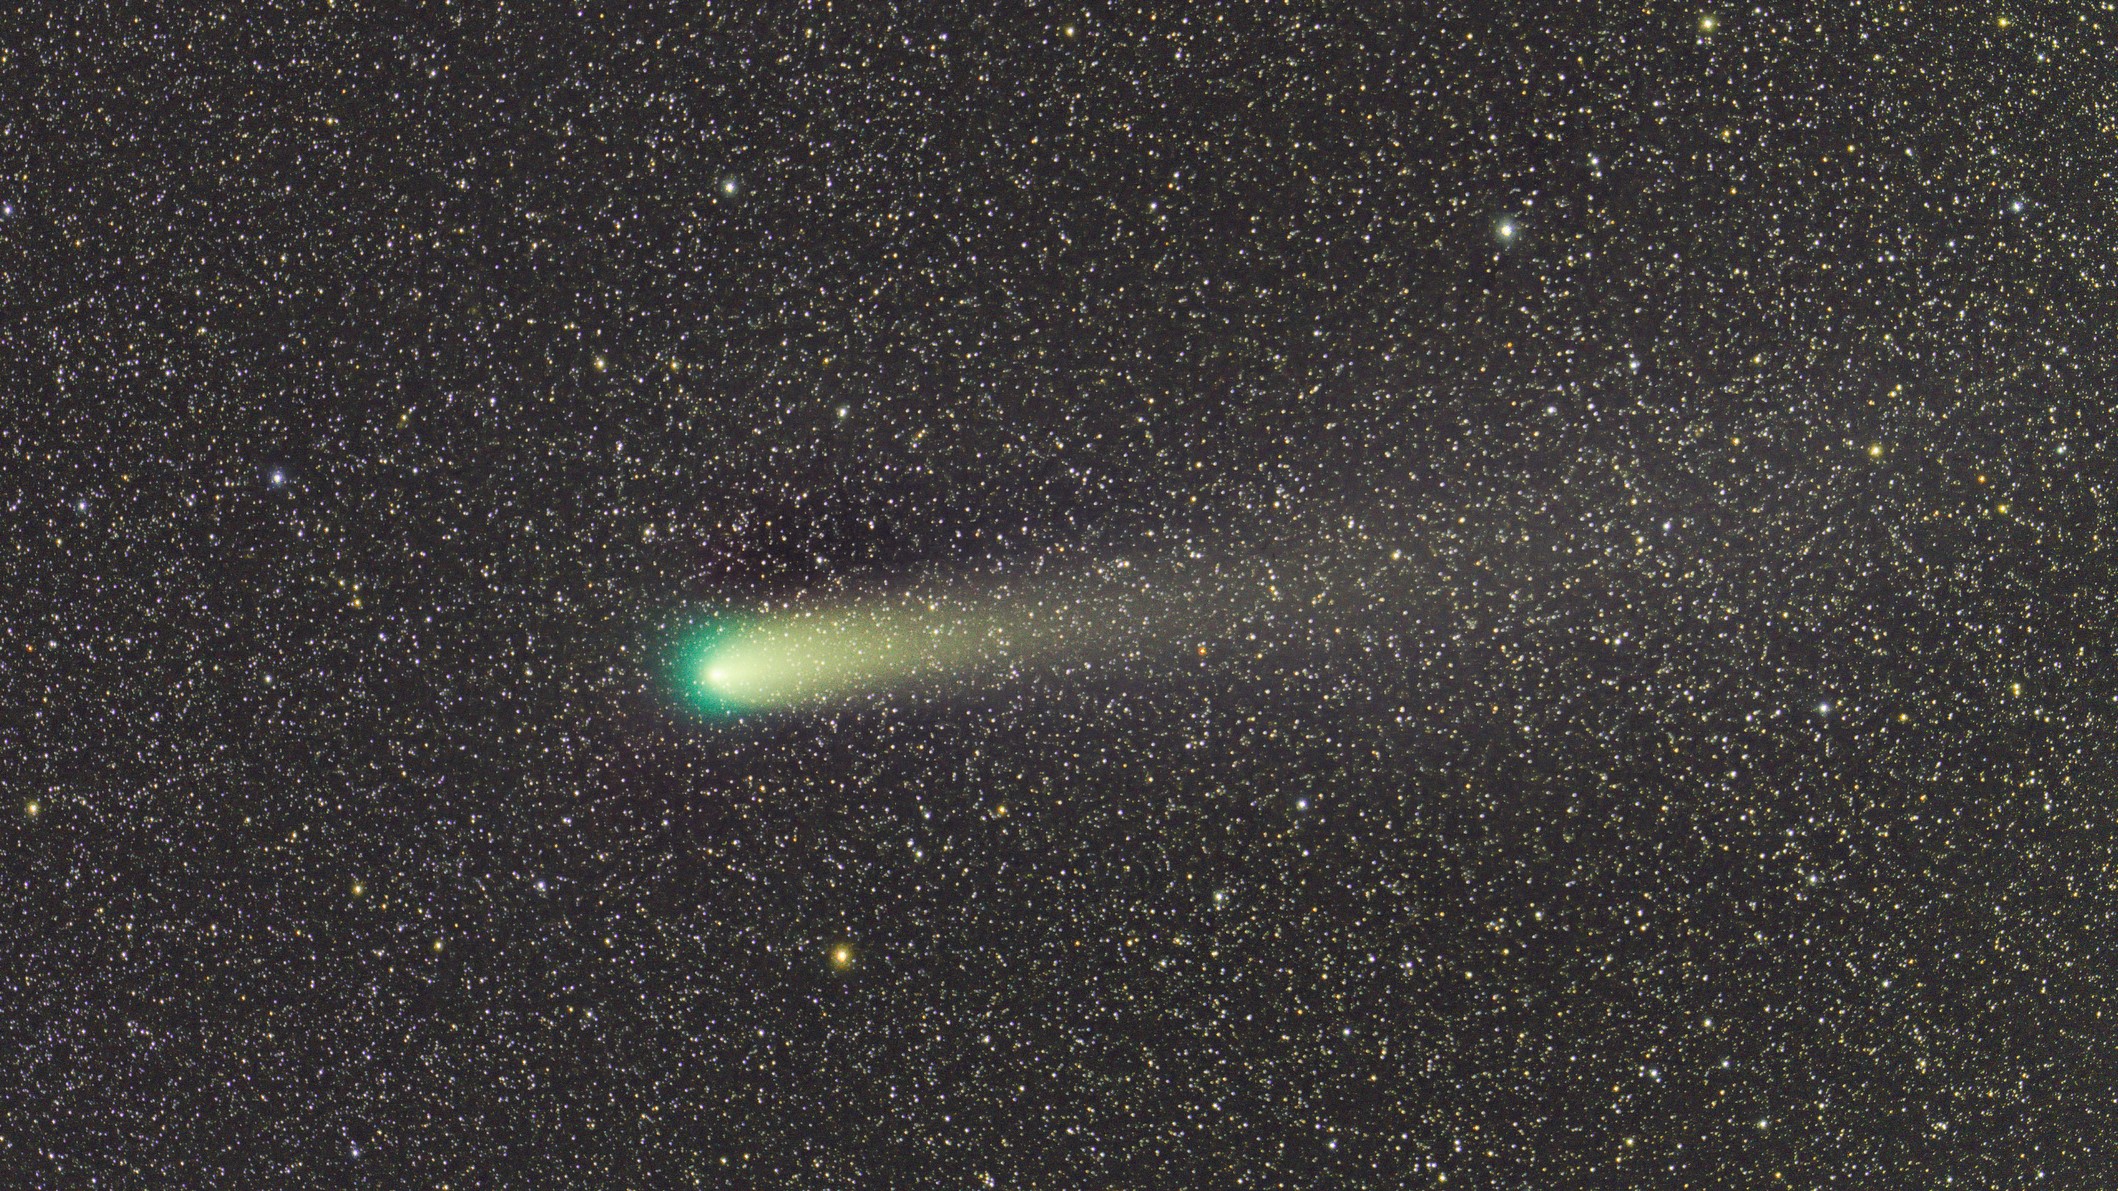 Comet Giacobini-Zinner glowing green with a pale green/yellow tail.